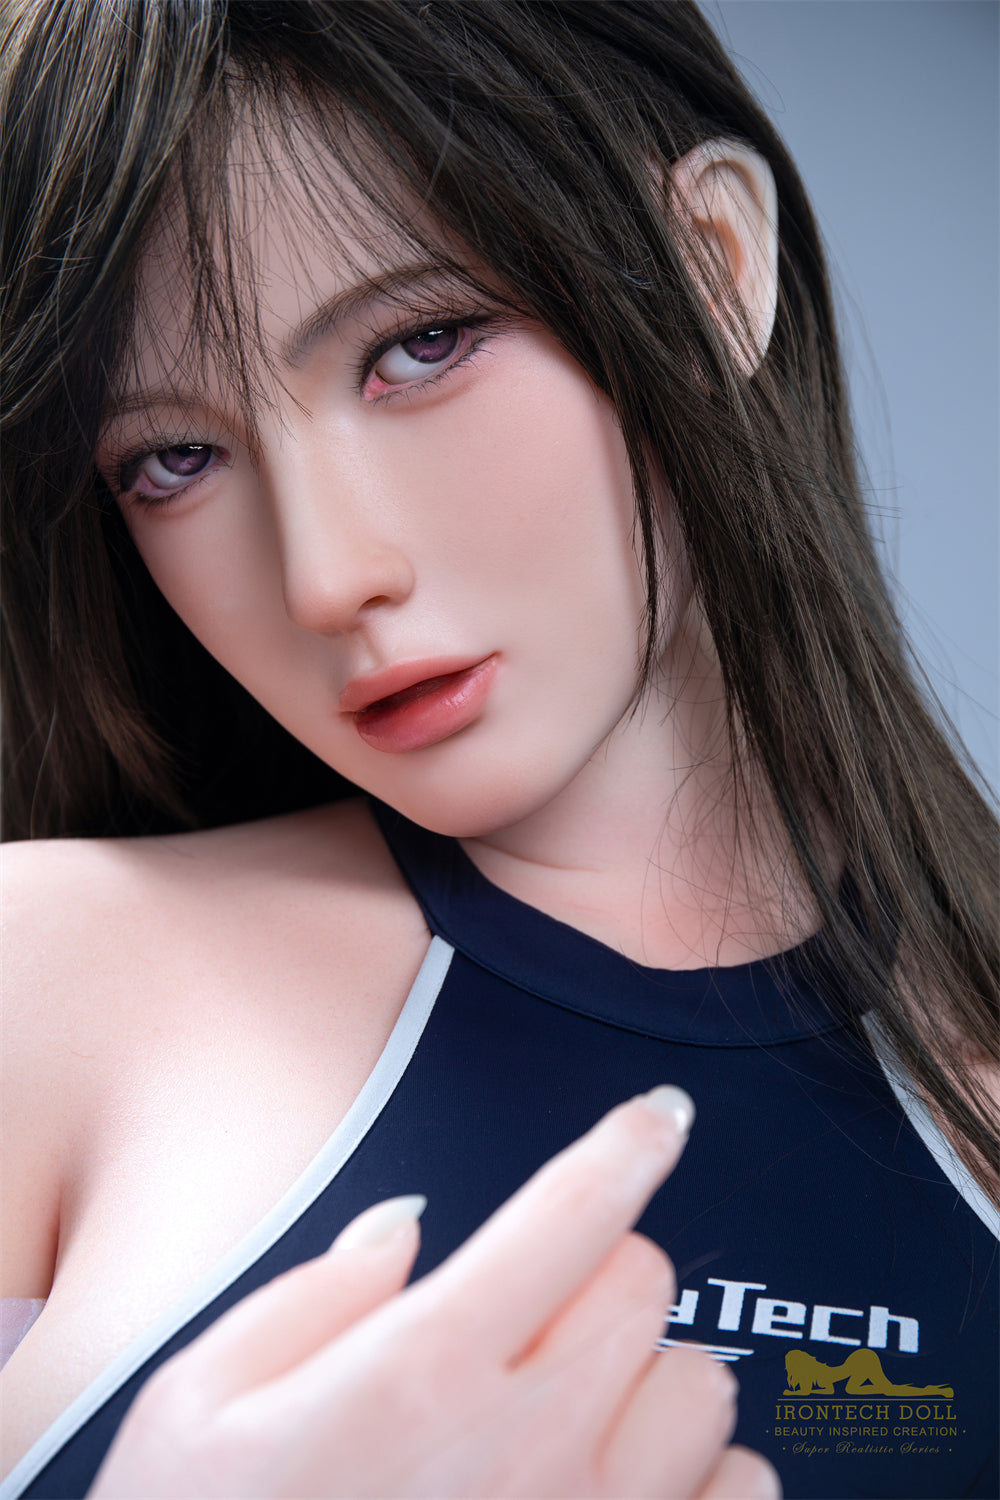 Irontech - Silicone Realistic Sex Doll - 5ft 5in (164cm) - Vivian - Love Dolls 4U